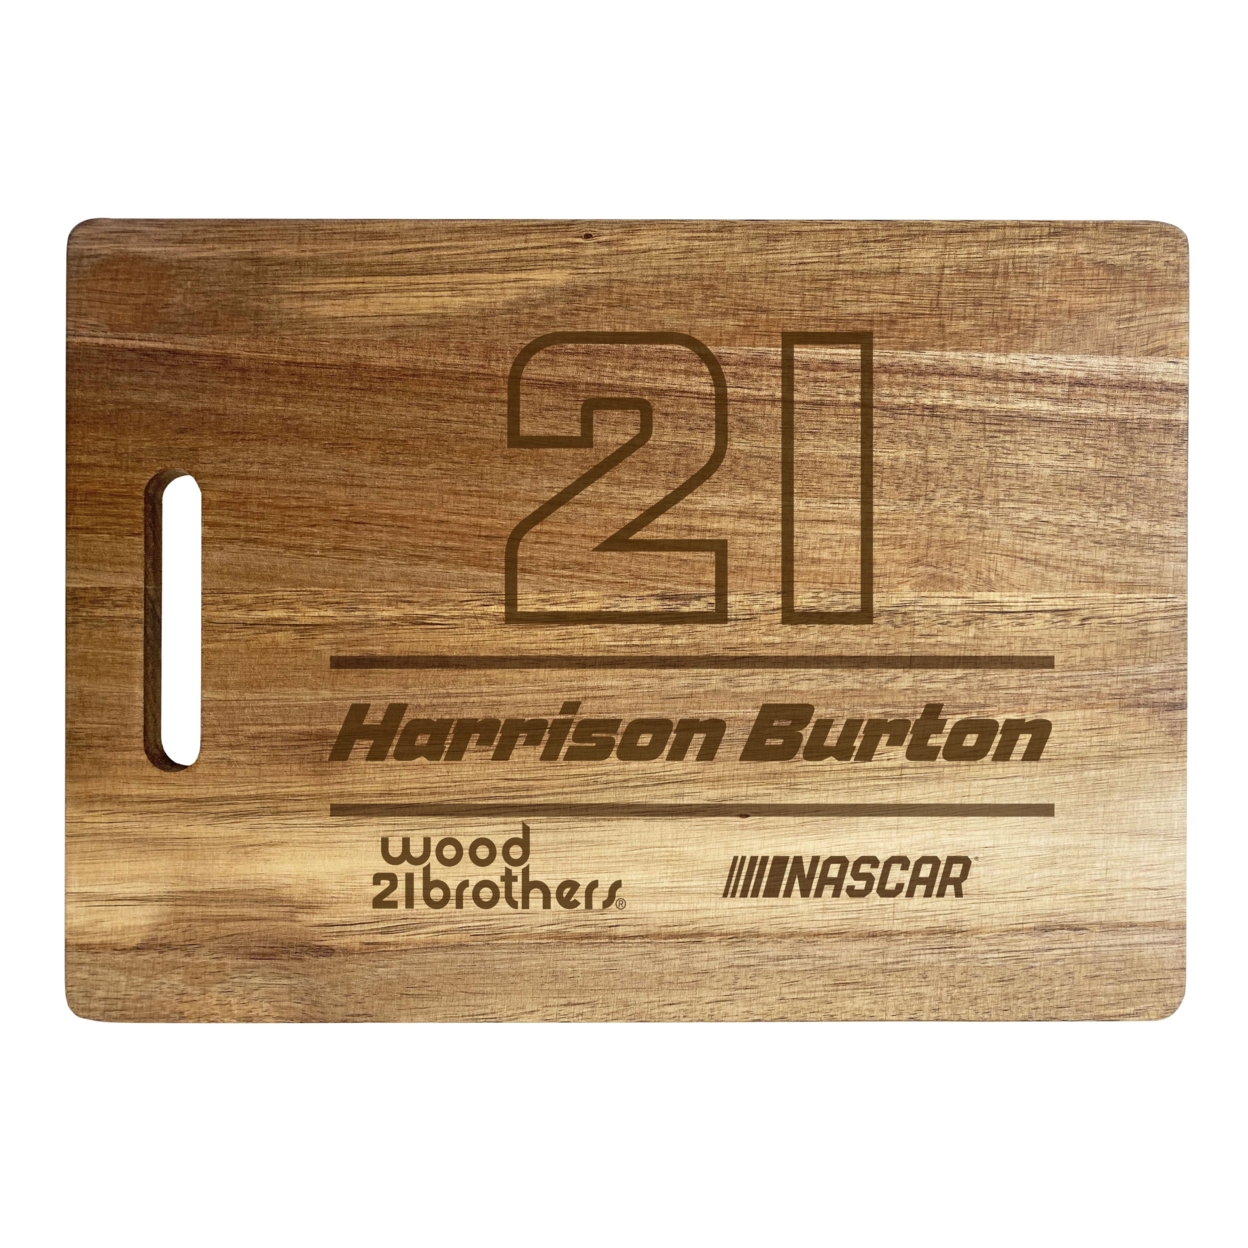 #21 Harrison Burton NASCAR Officially Licensed Engraved Wooden Cutting Board